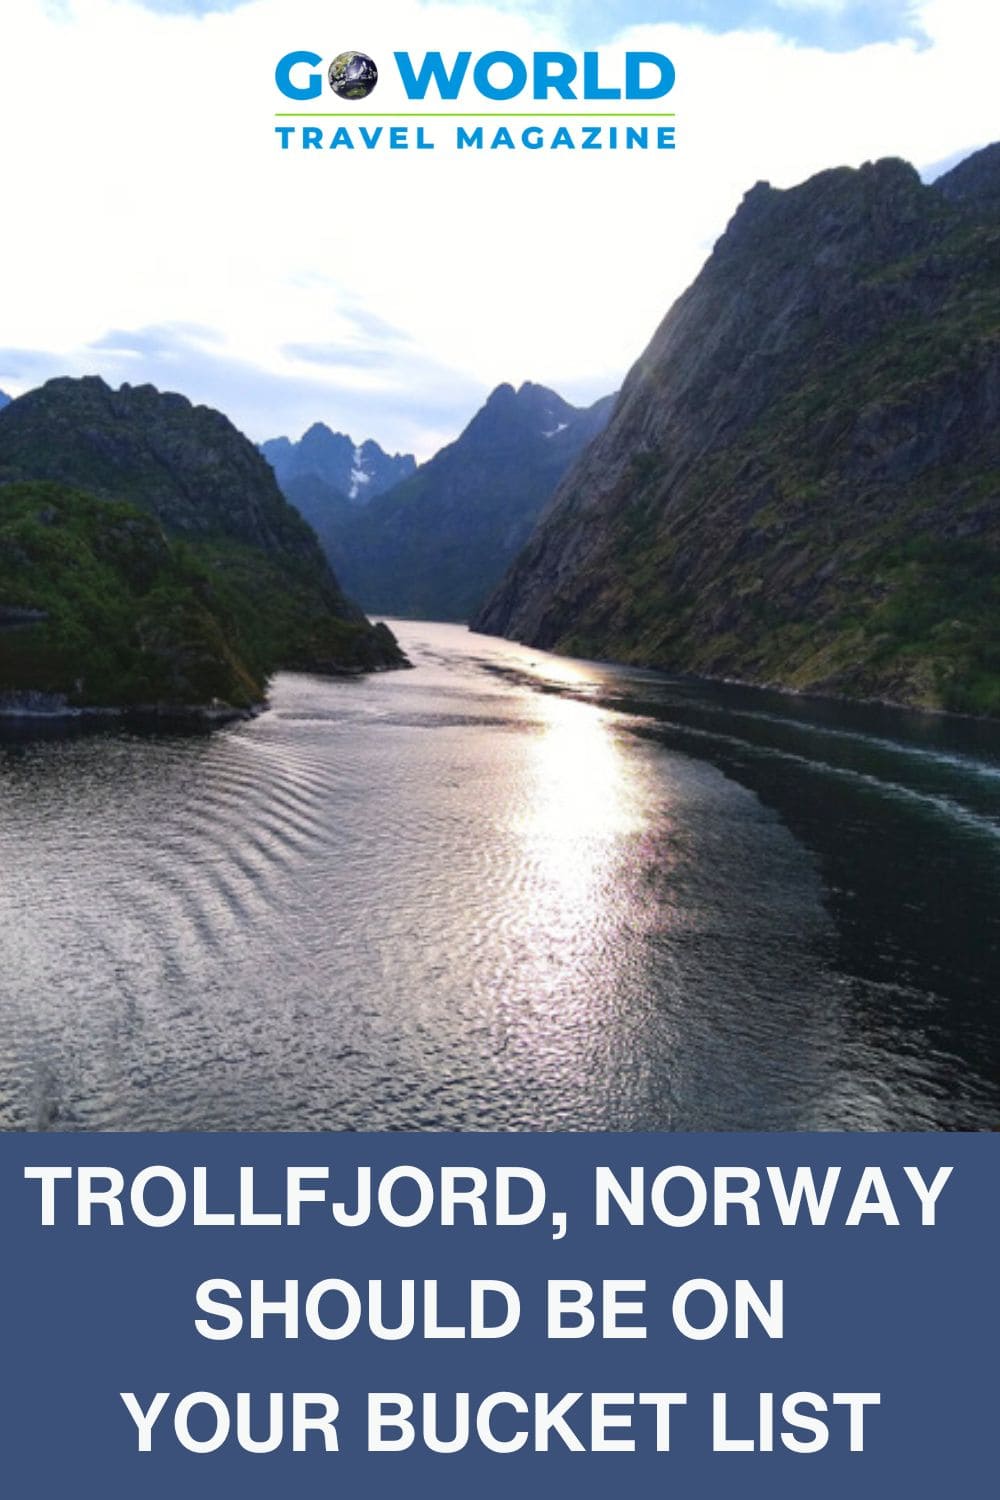 Reasons why Norway's shortest but most spectacular fjord, Trollfjord, should be on your bucket list, even if you've never heard of it. #Norway